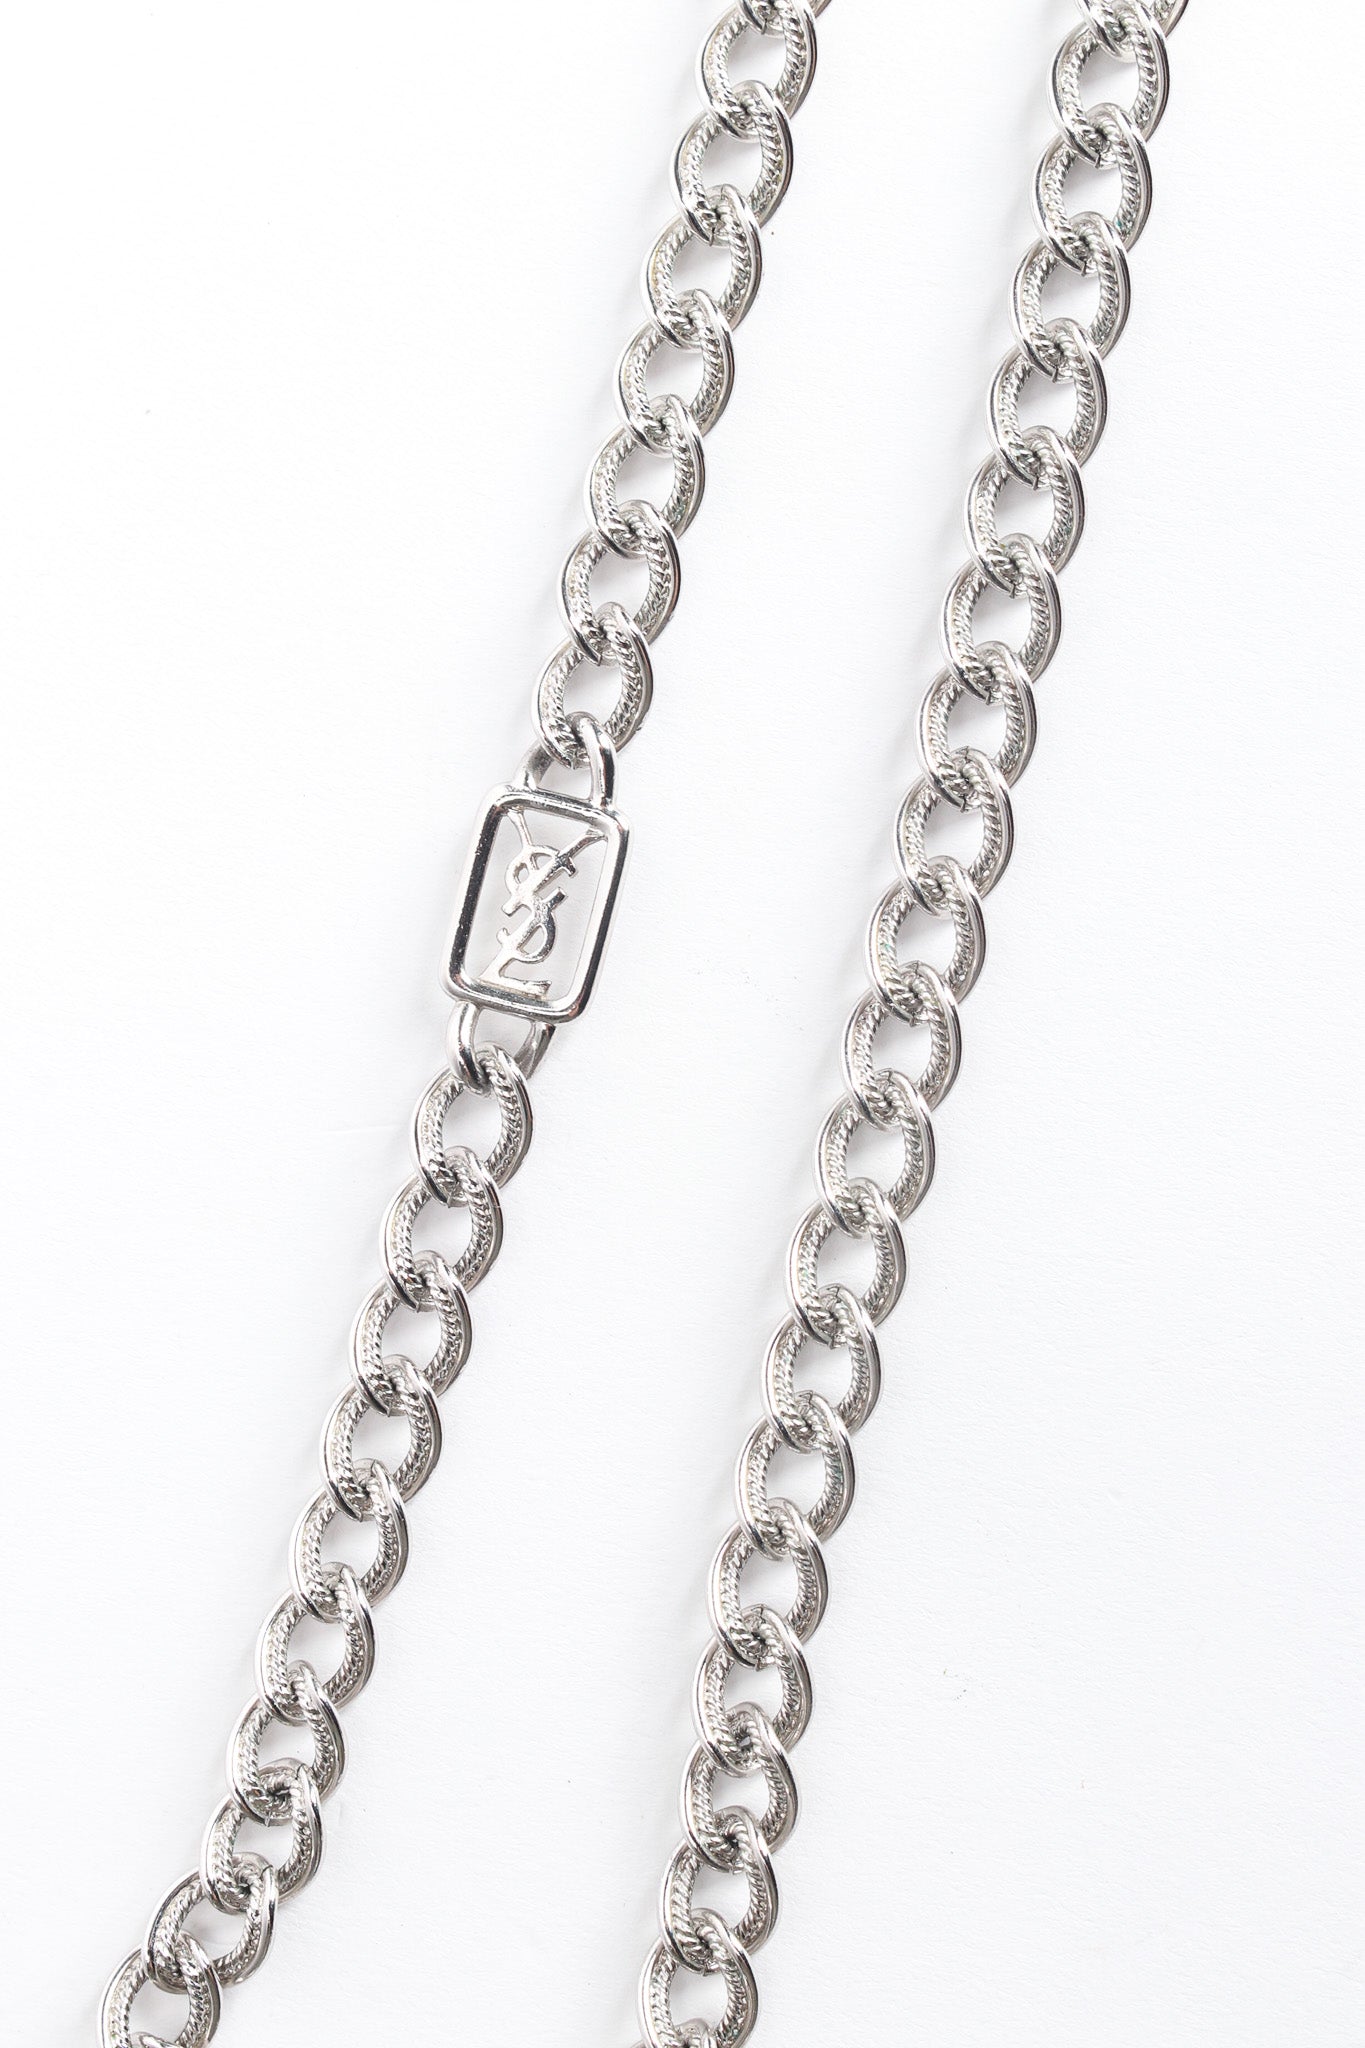 Signed Elongated Curb Necklace